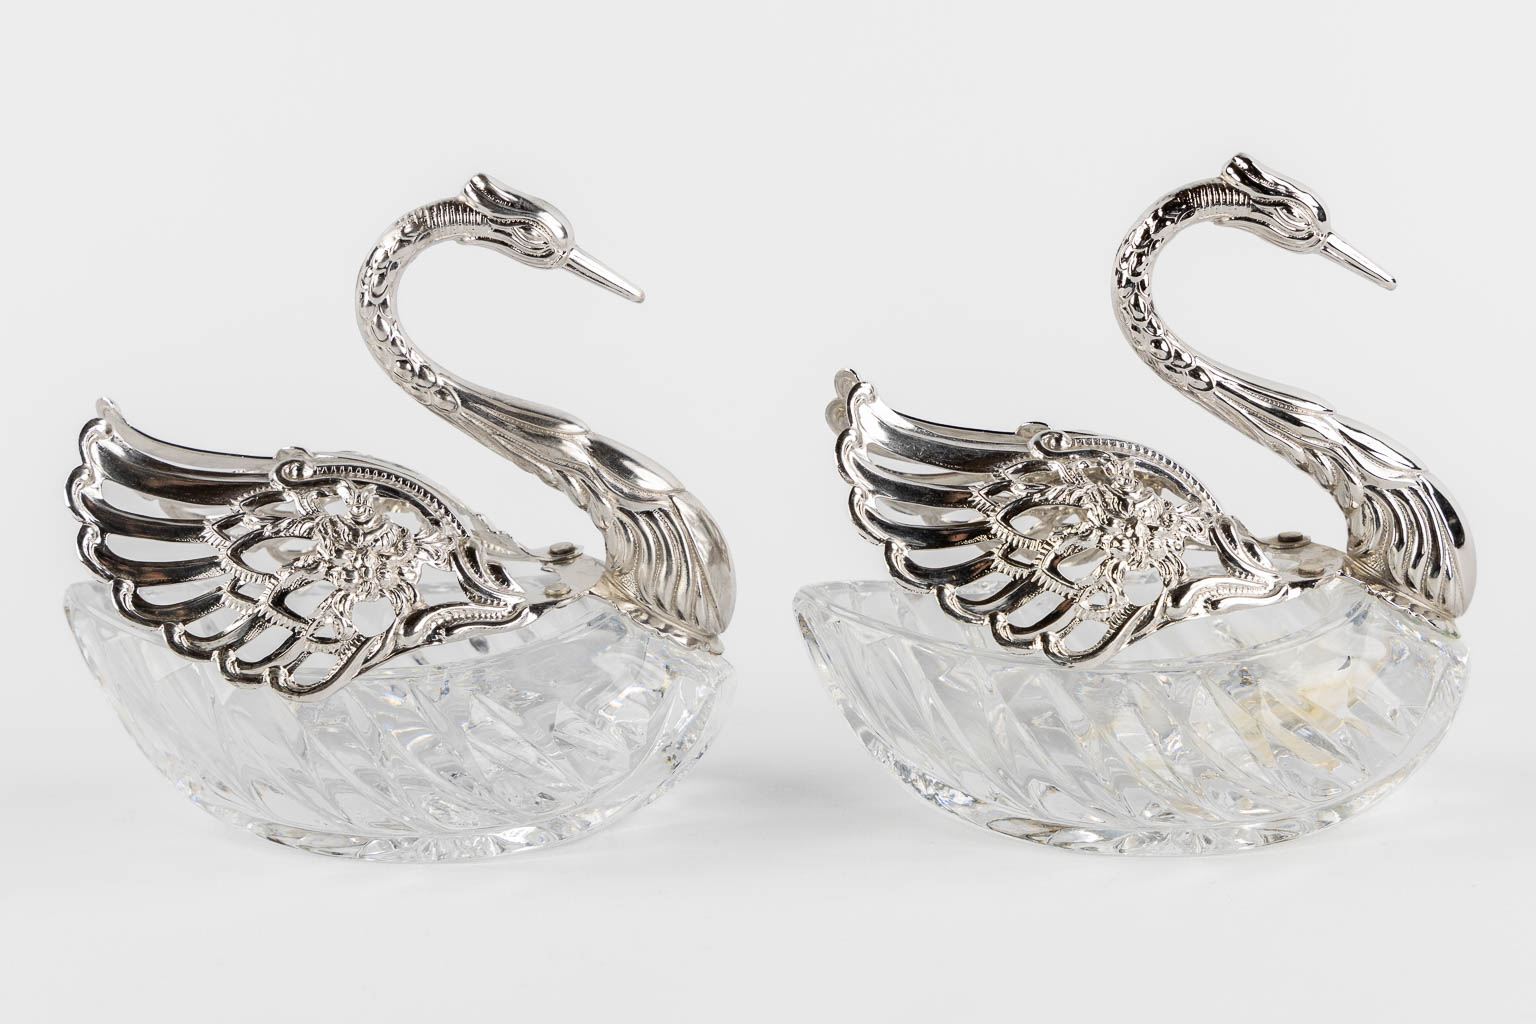 A large collection of silver and silver-plated objects, table accessories and serving ware. (L:16 x W:37 x H:12,5 cm)